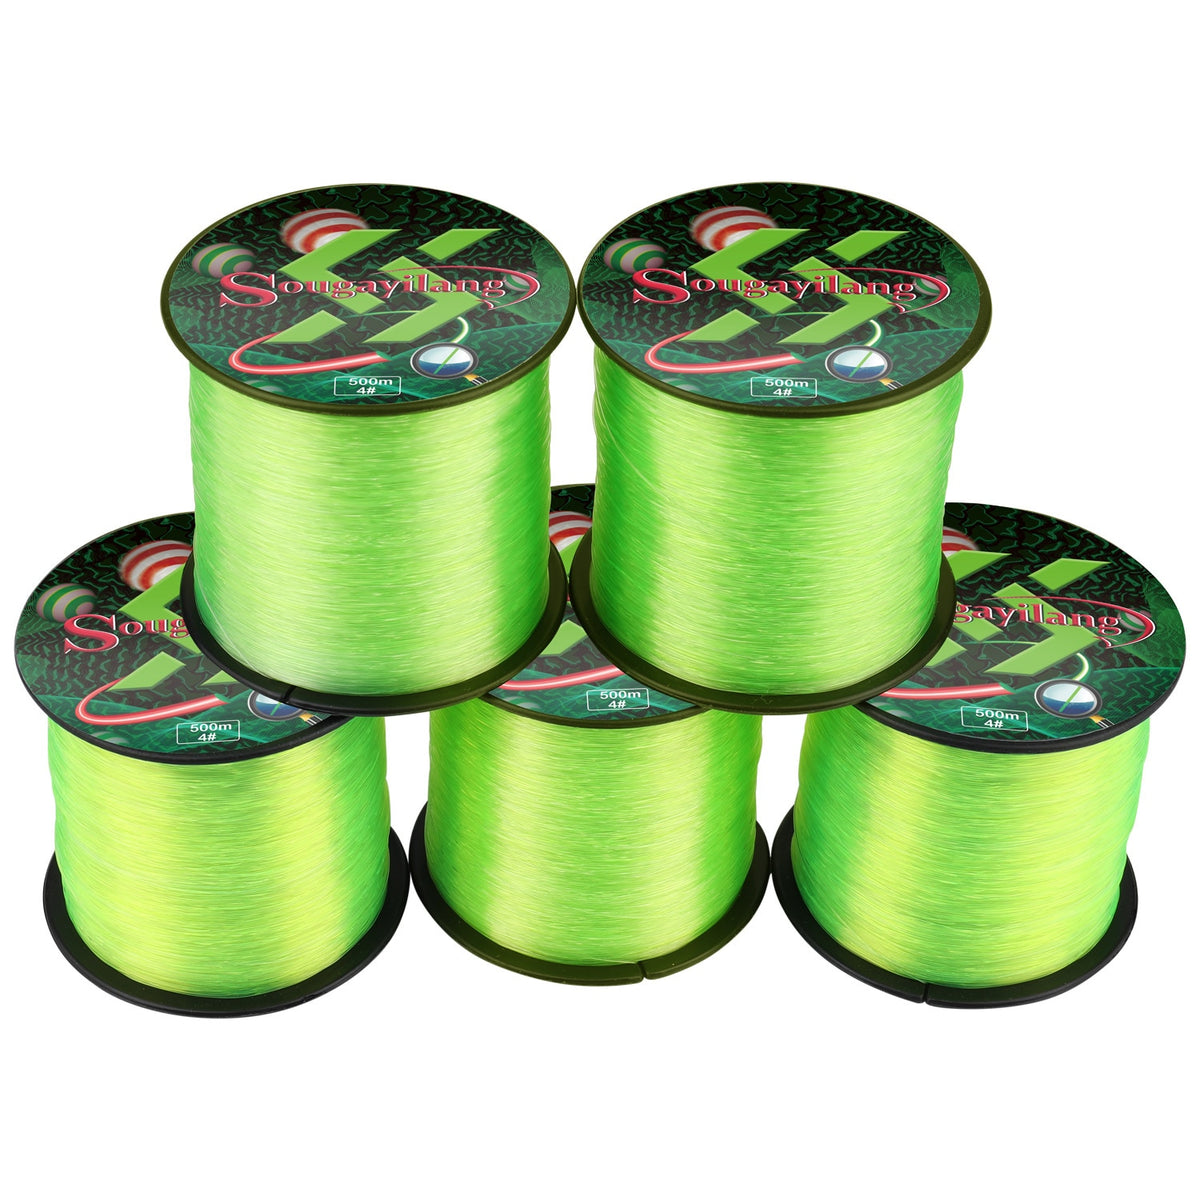 4 Strand Fluorescent Color Freshwater and Saltwater Strong Braid